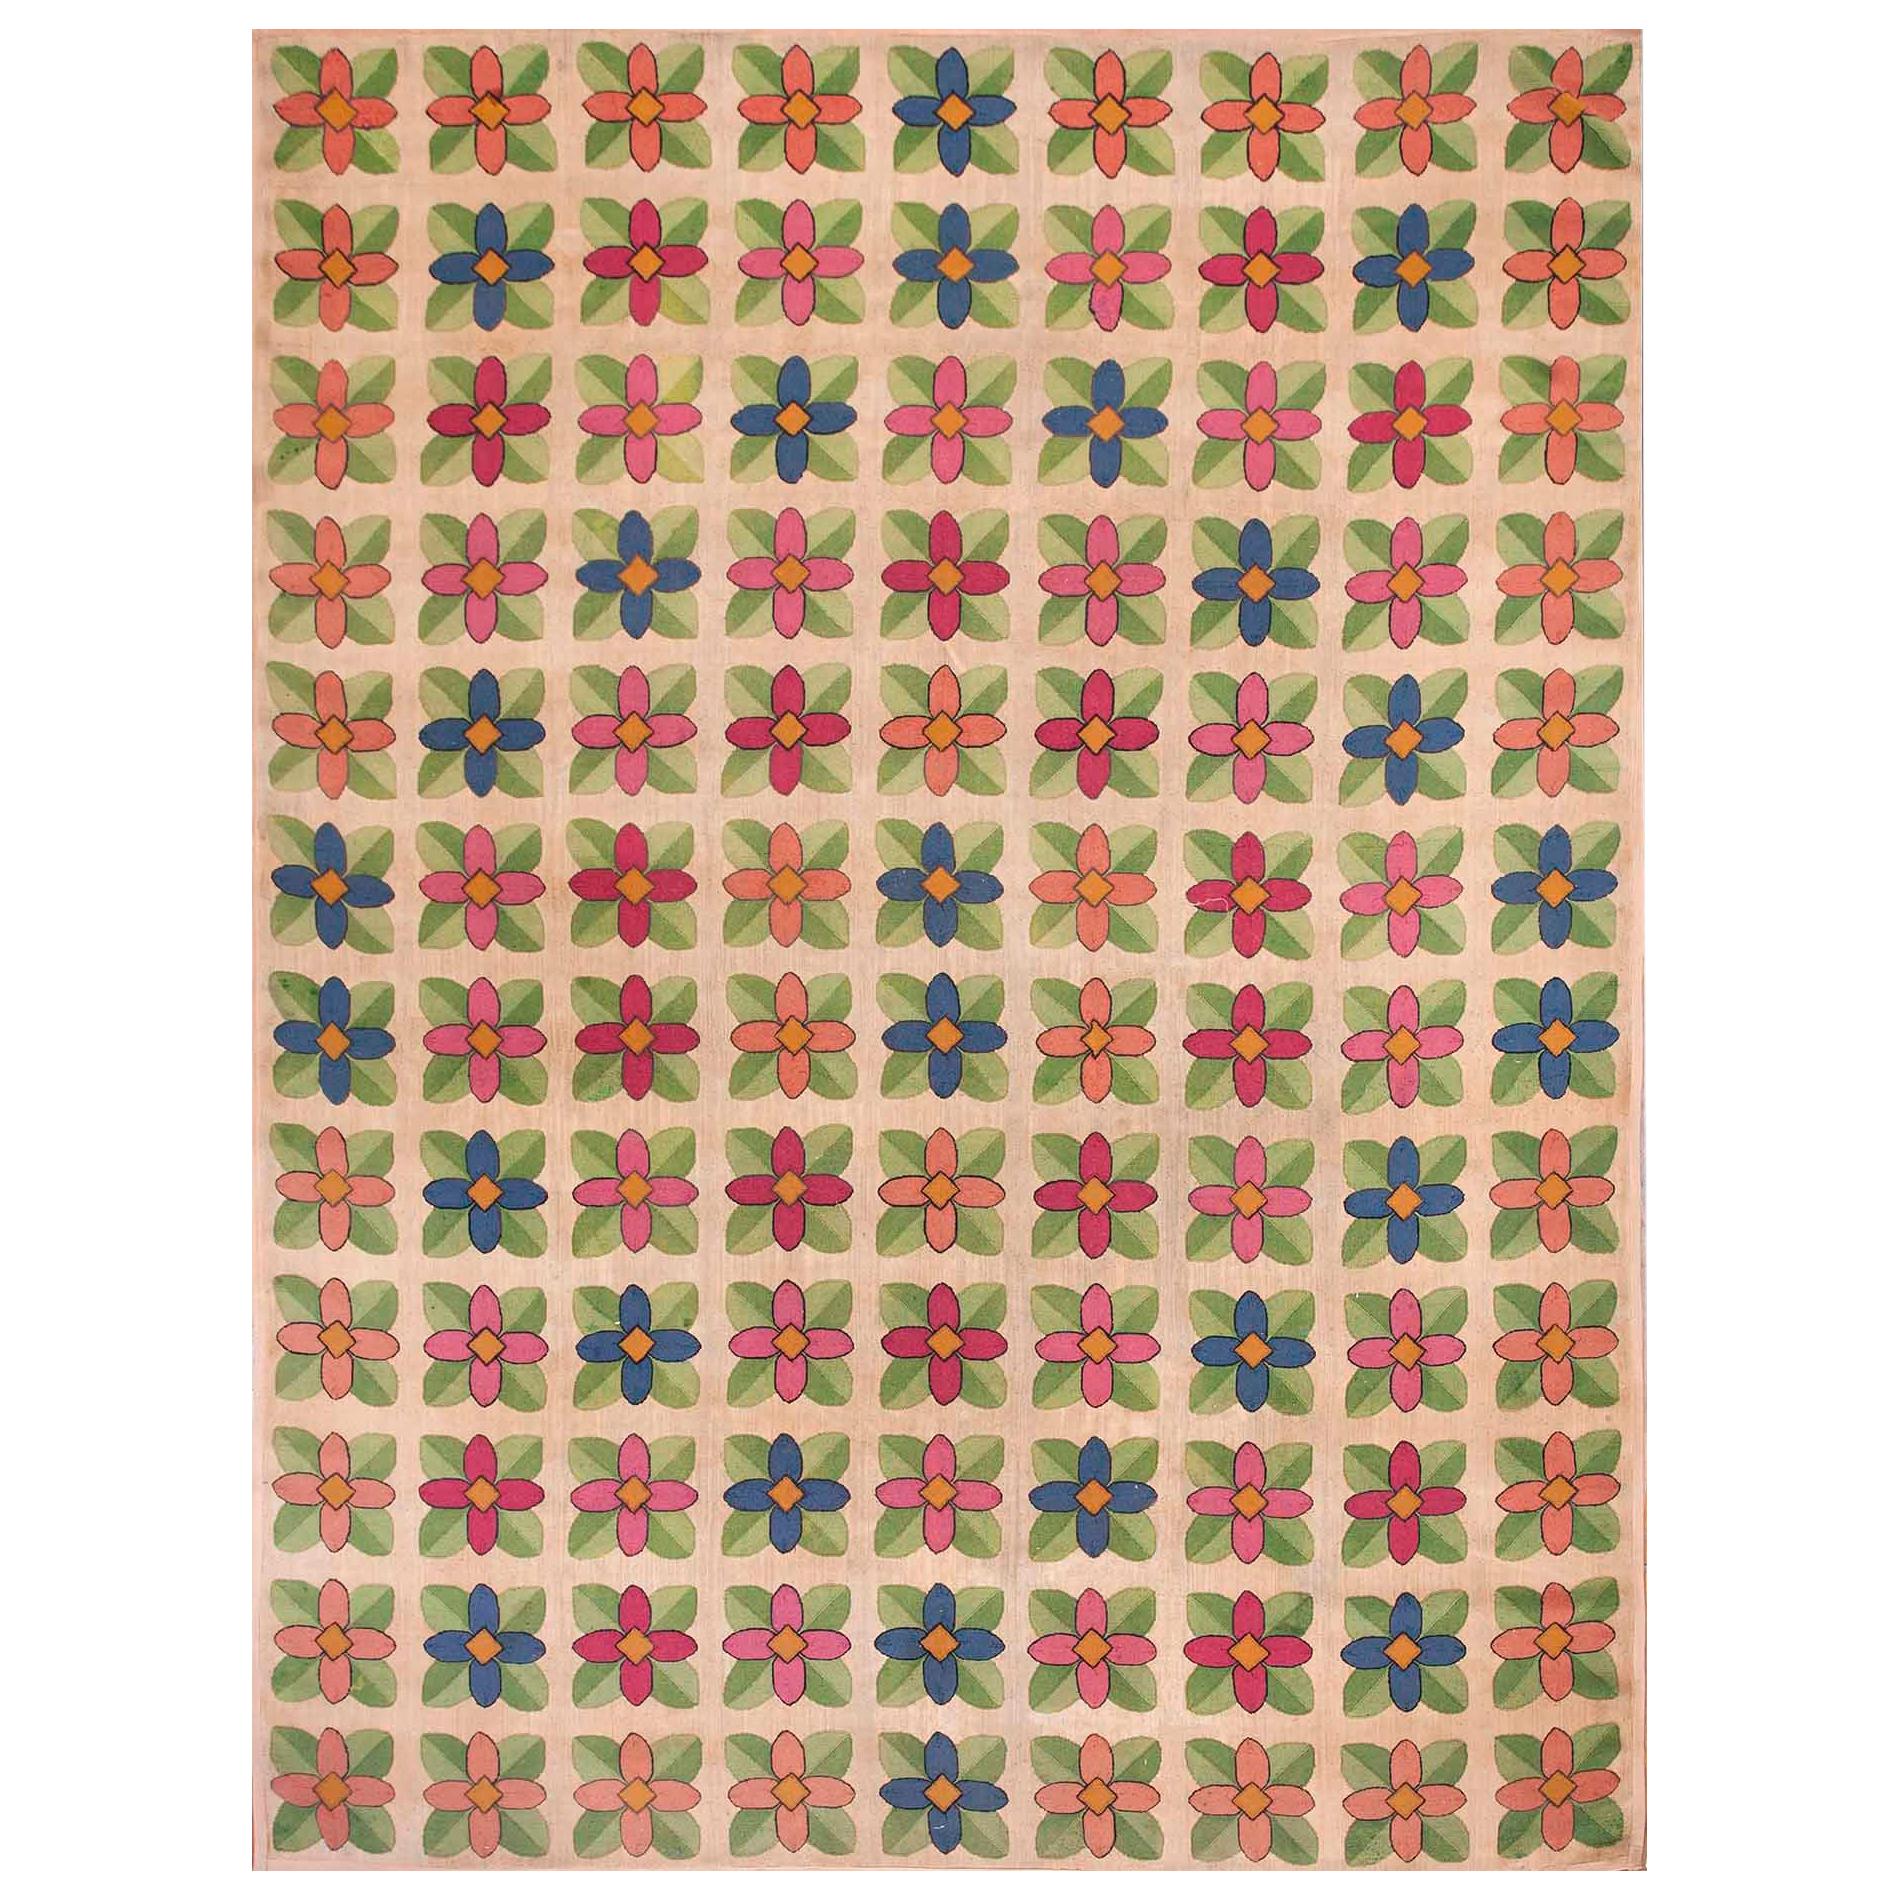 Early 20th Century American Hooked Rug ( 9' x 12' - 274 x 366 )